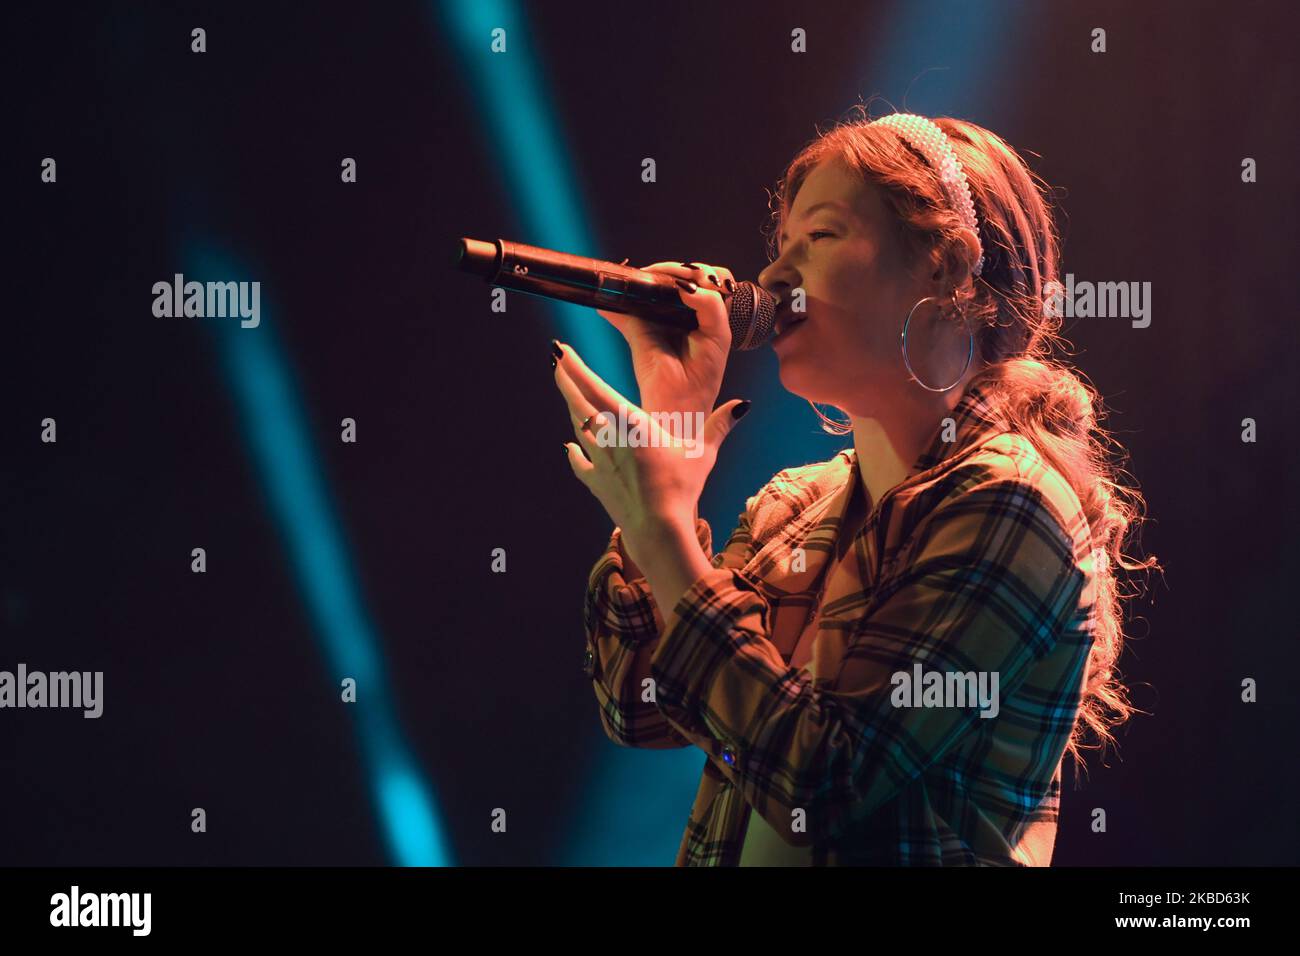 Zuzanna Jab?onska (age 16), a Polish singer, finalist of the first Polish edition 'The Voice Kids' (2018), performs during the 2019 edition of Siemacha Christmas Carols evening. On Sunday, December 15, in Krakow, Lesser Poland Voivodeship, Poland. (Photo by Artur Widak/NurPhoto) Stock Photo